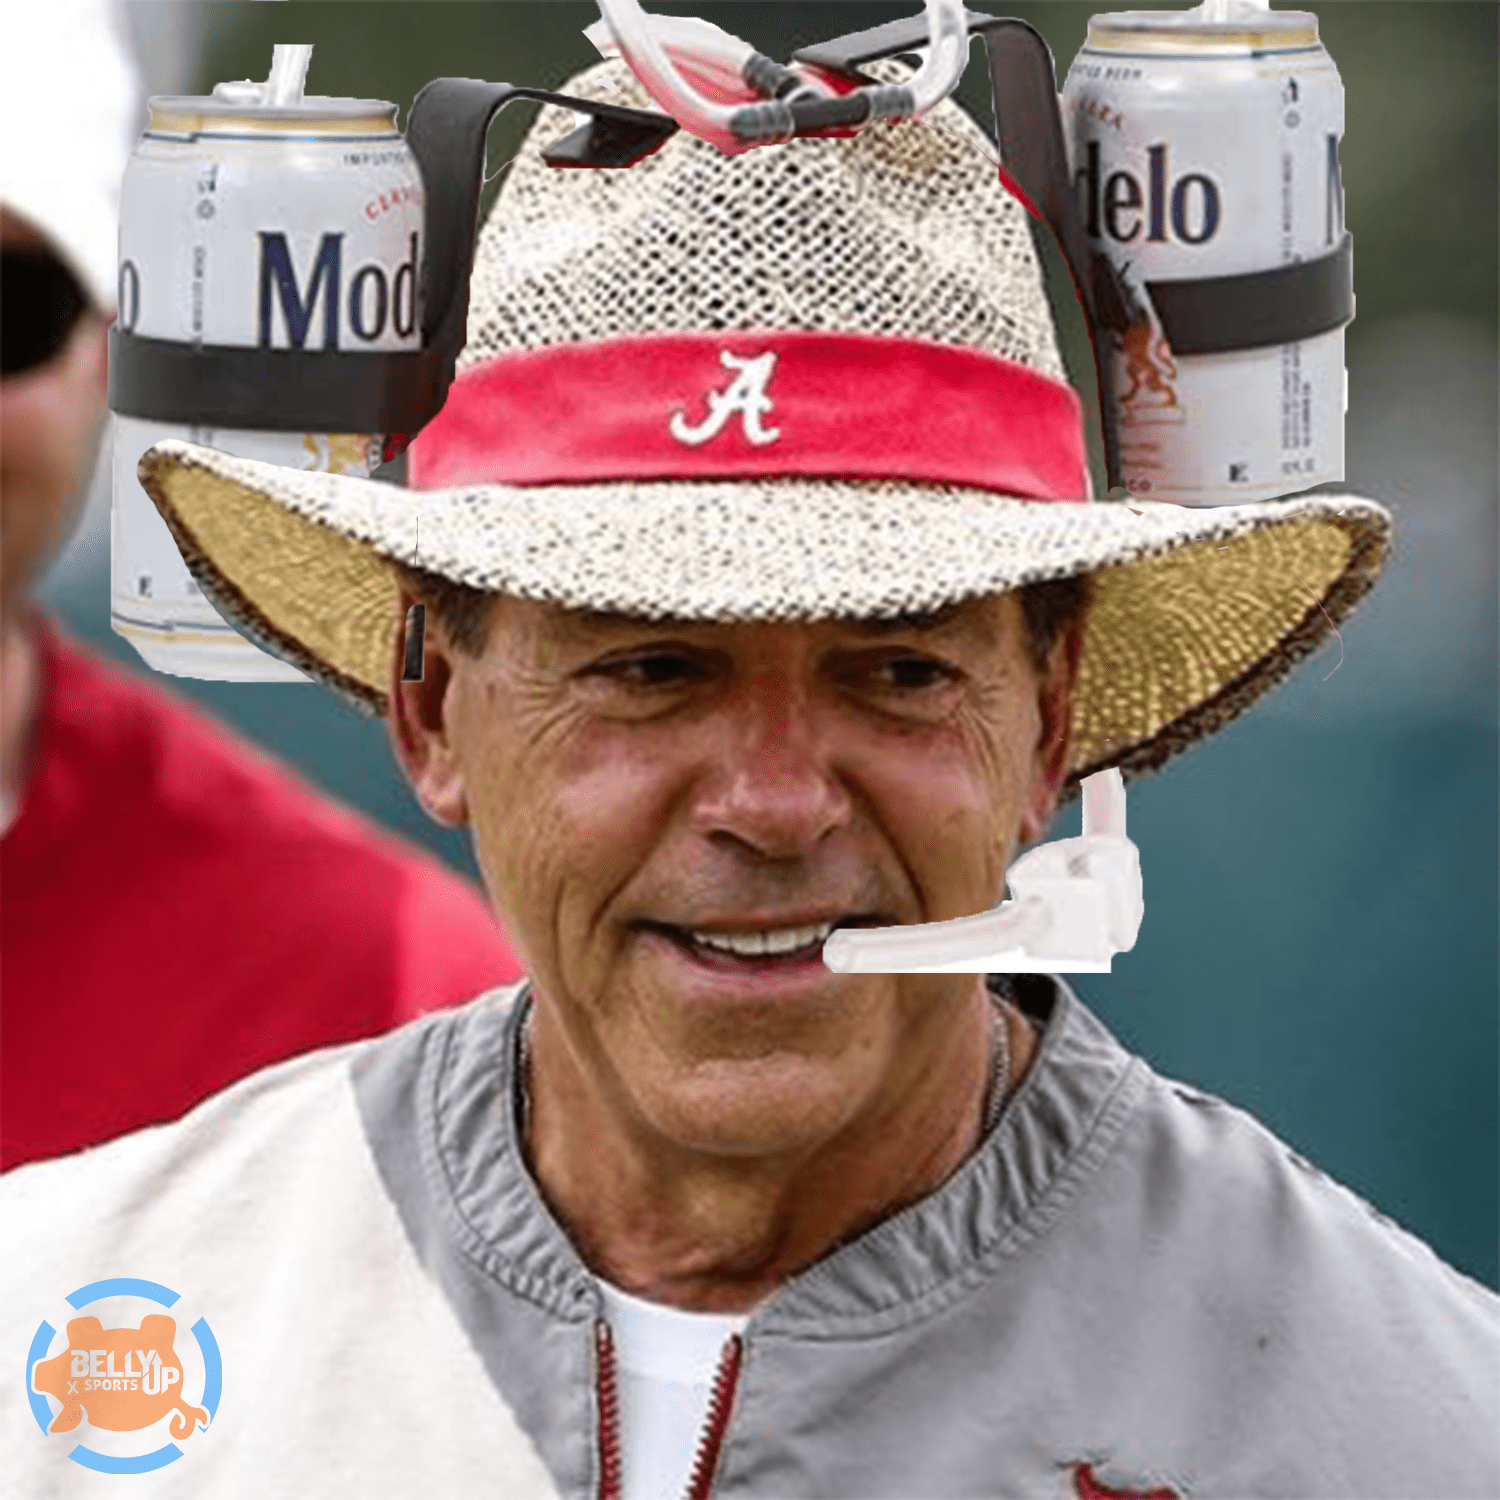  SEC Football Drinking Guide: Every Team’s Go To Drink